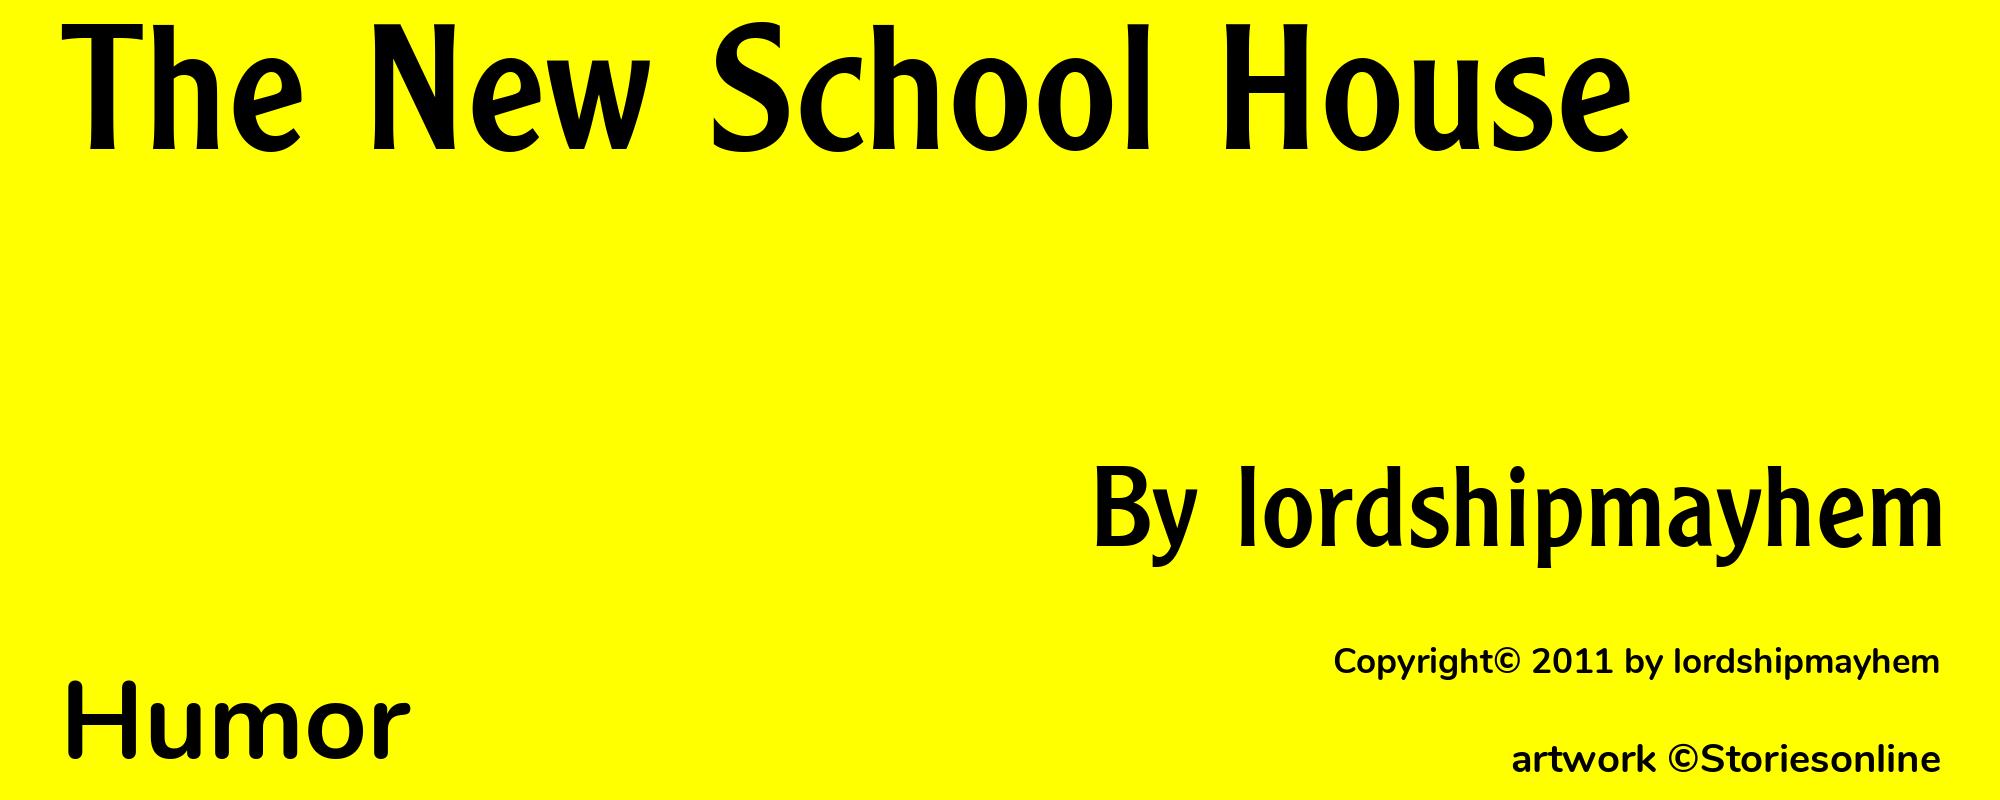 The New School House - Cover